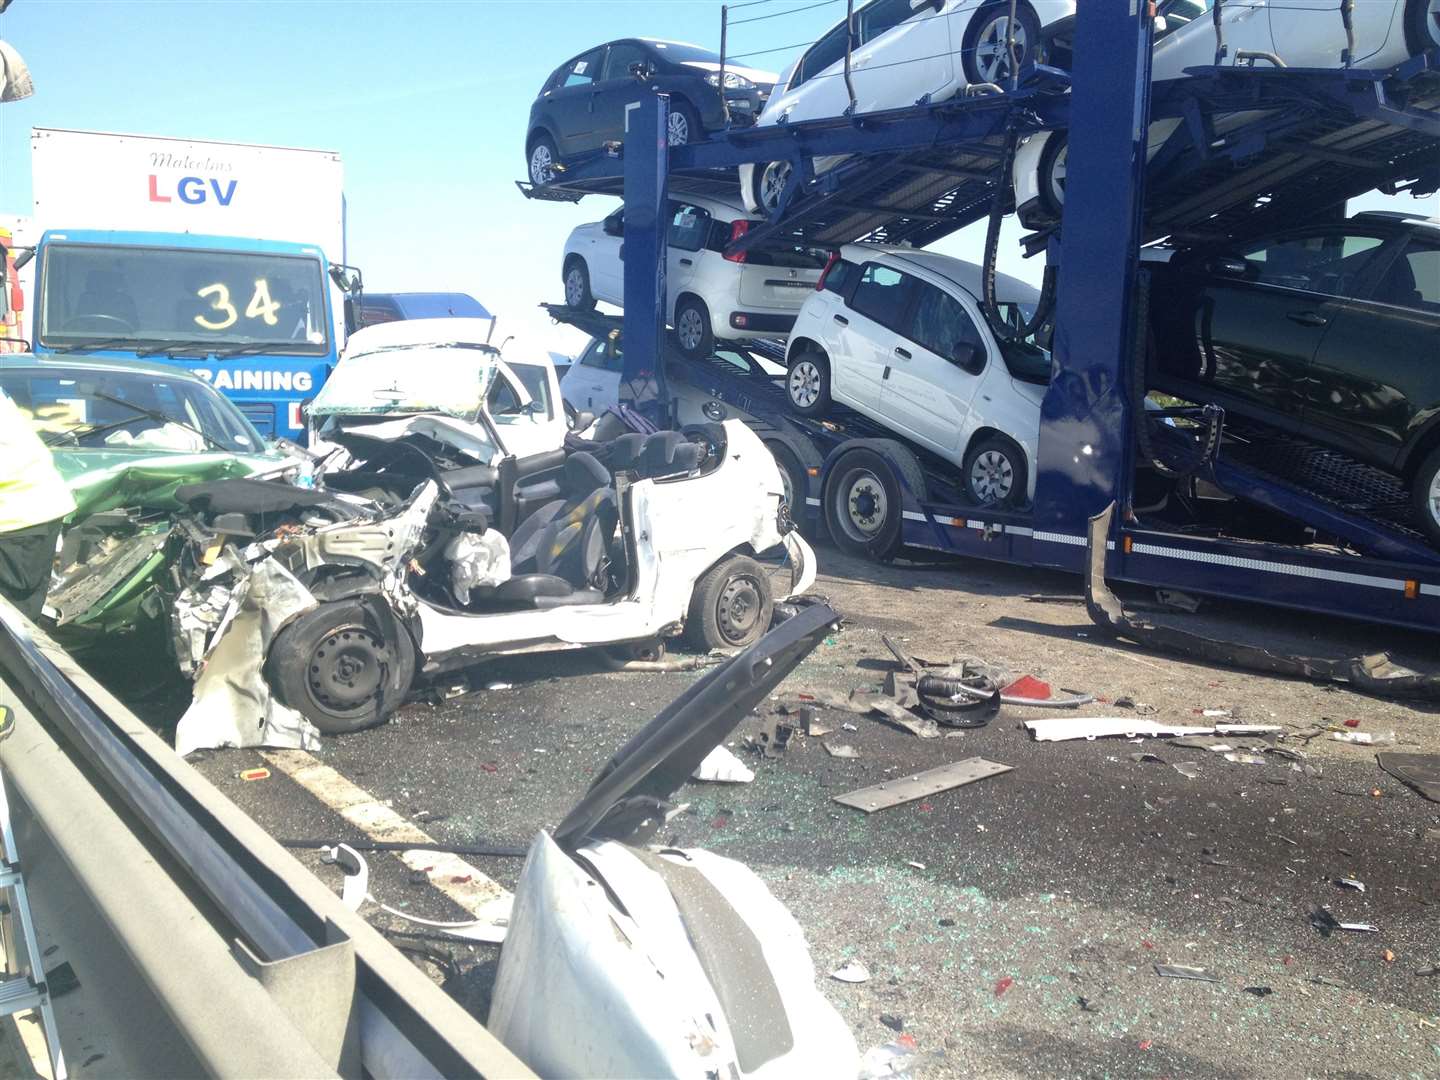 Damaged vehicles on the Sheppey Crossing following the huge pile up in 2013